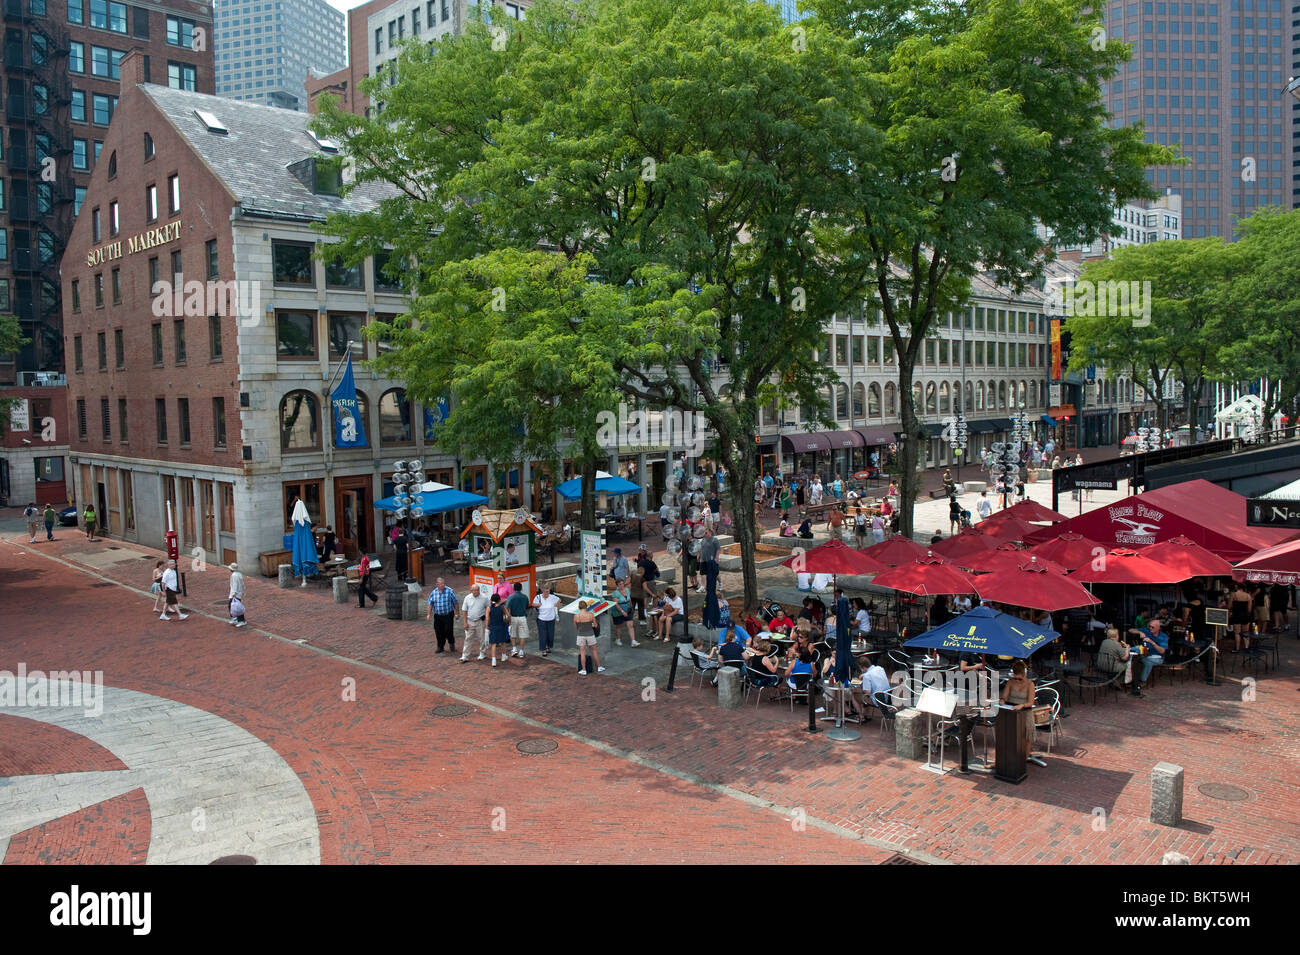 The Historic Quincy Market Near Faneuil Hall in Downtown Boston, Massachusetts, USA Stock Photo